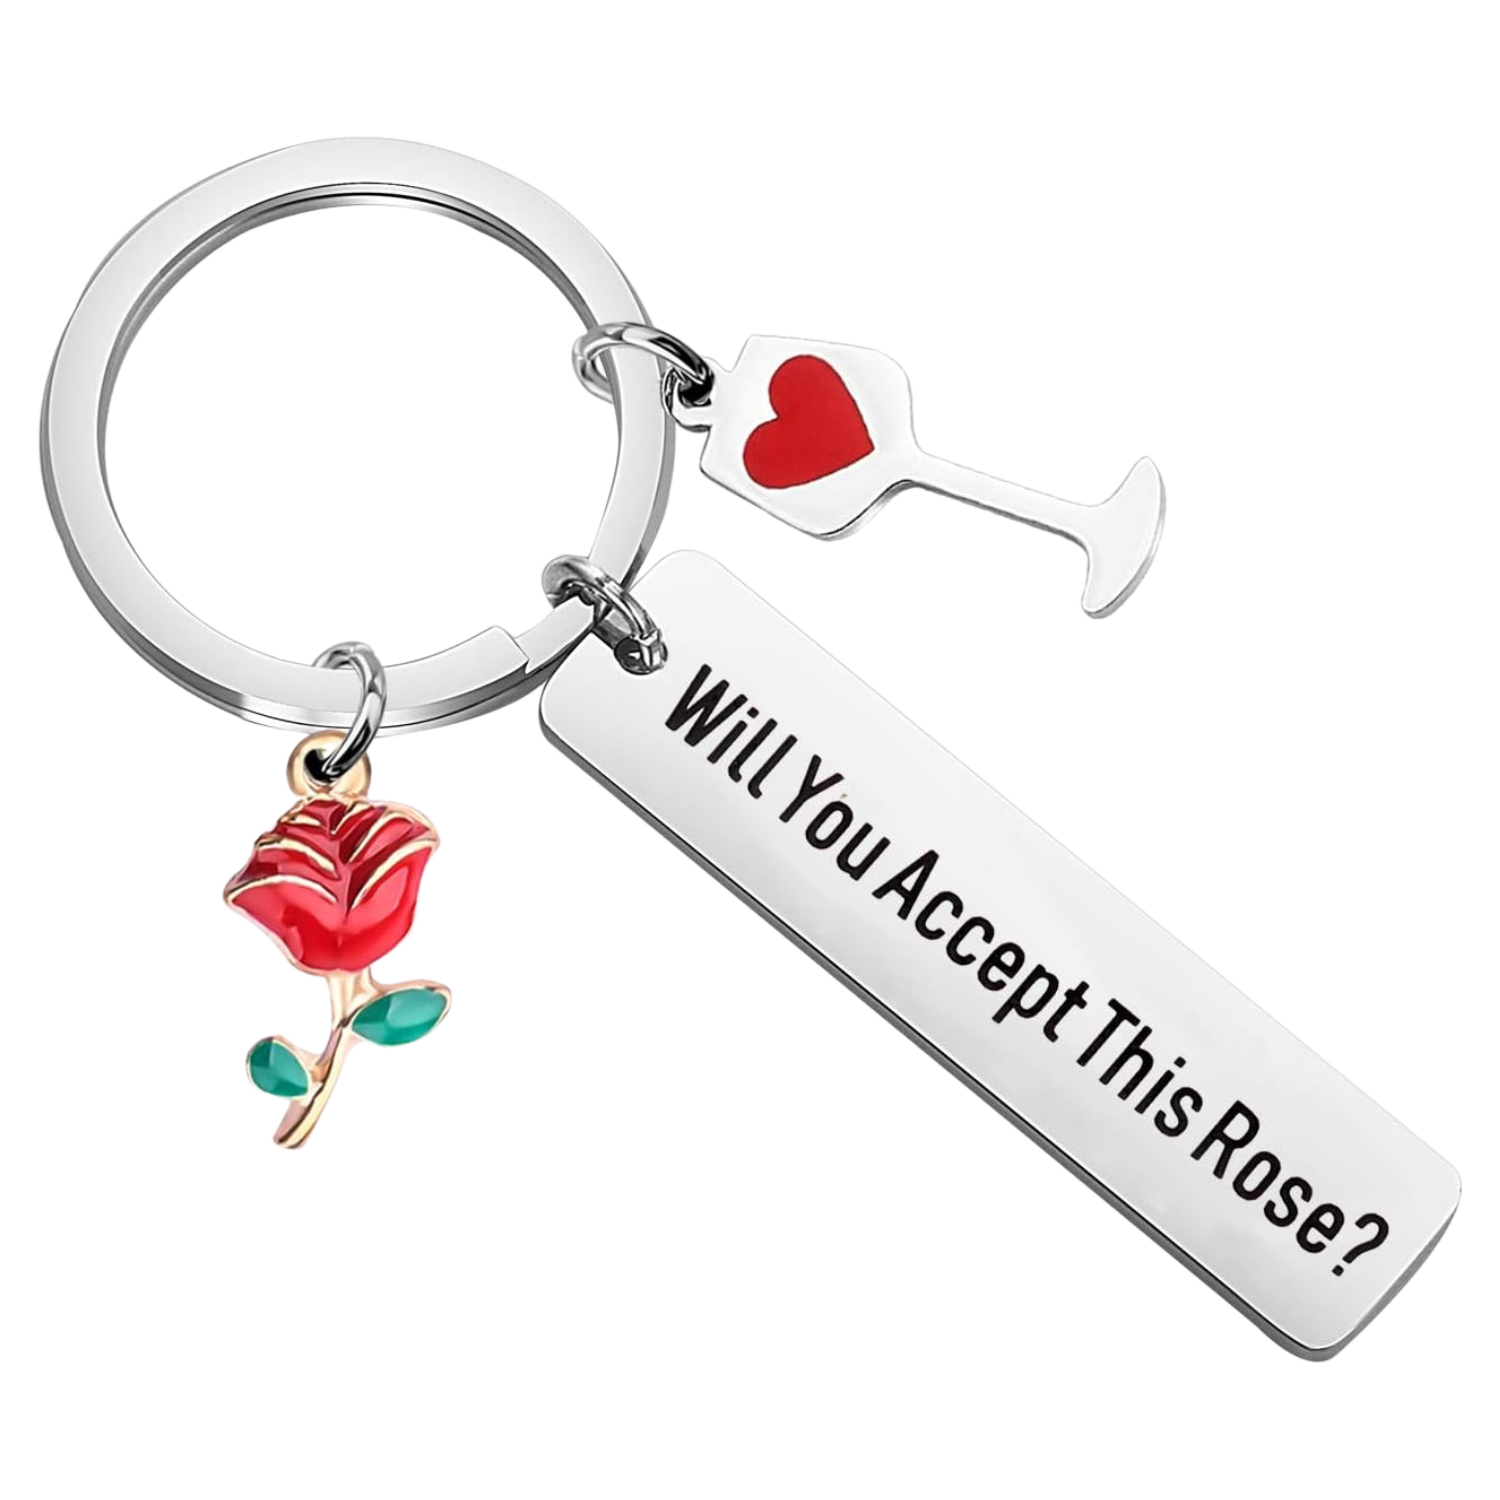 This image shows a keychain with charms like a rose, a glass of wine with a heart and the phrase 